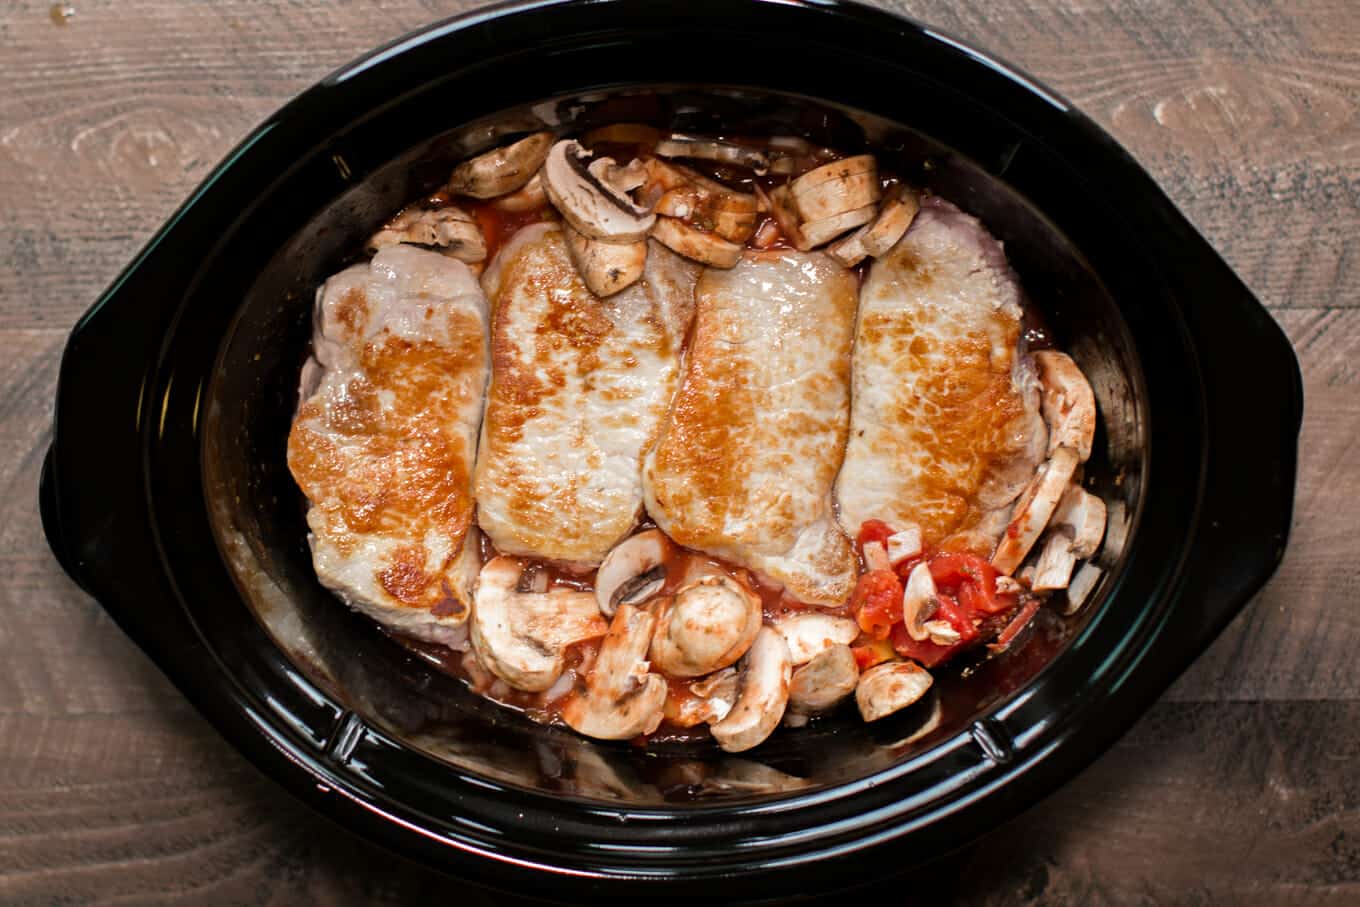 brown pork chops in slow cooker with mushrooms and tomatoes.